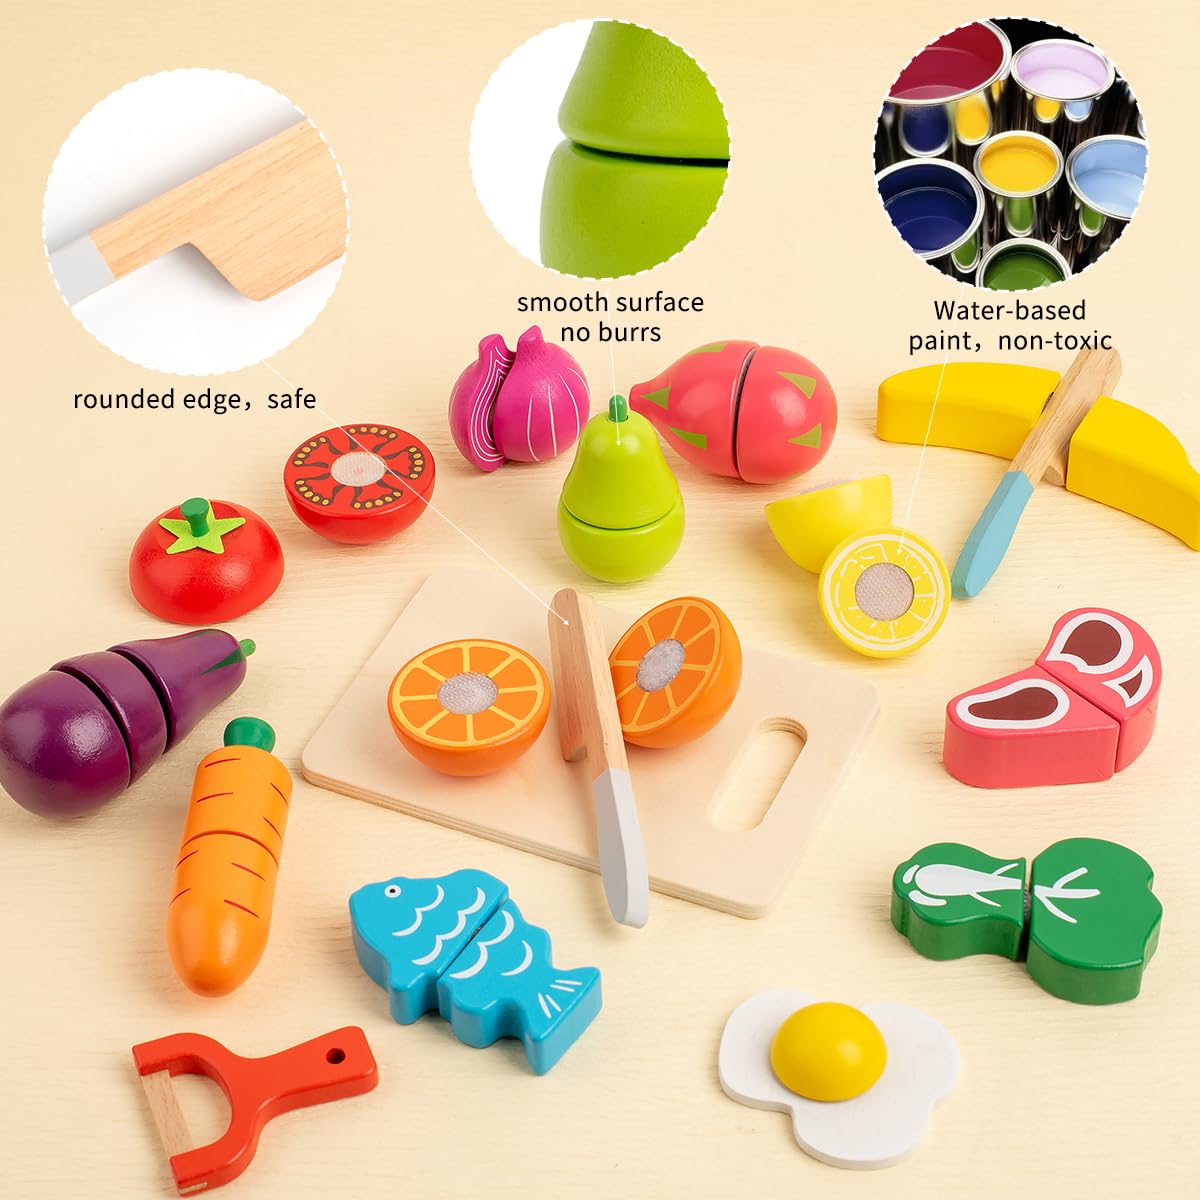 32 Pcs Wooden Play Food Sets for Kids Kitchen Accessories, Early Education Montessori Kids Toys ,Vegetables Toddler Toys Role Pretend Playfor